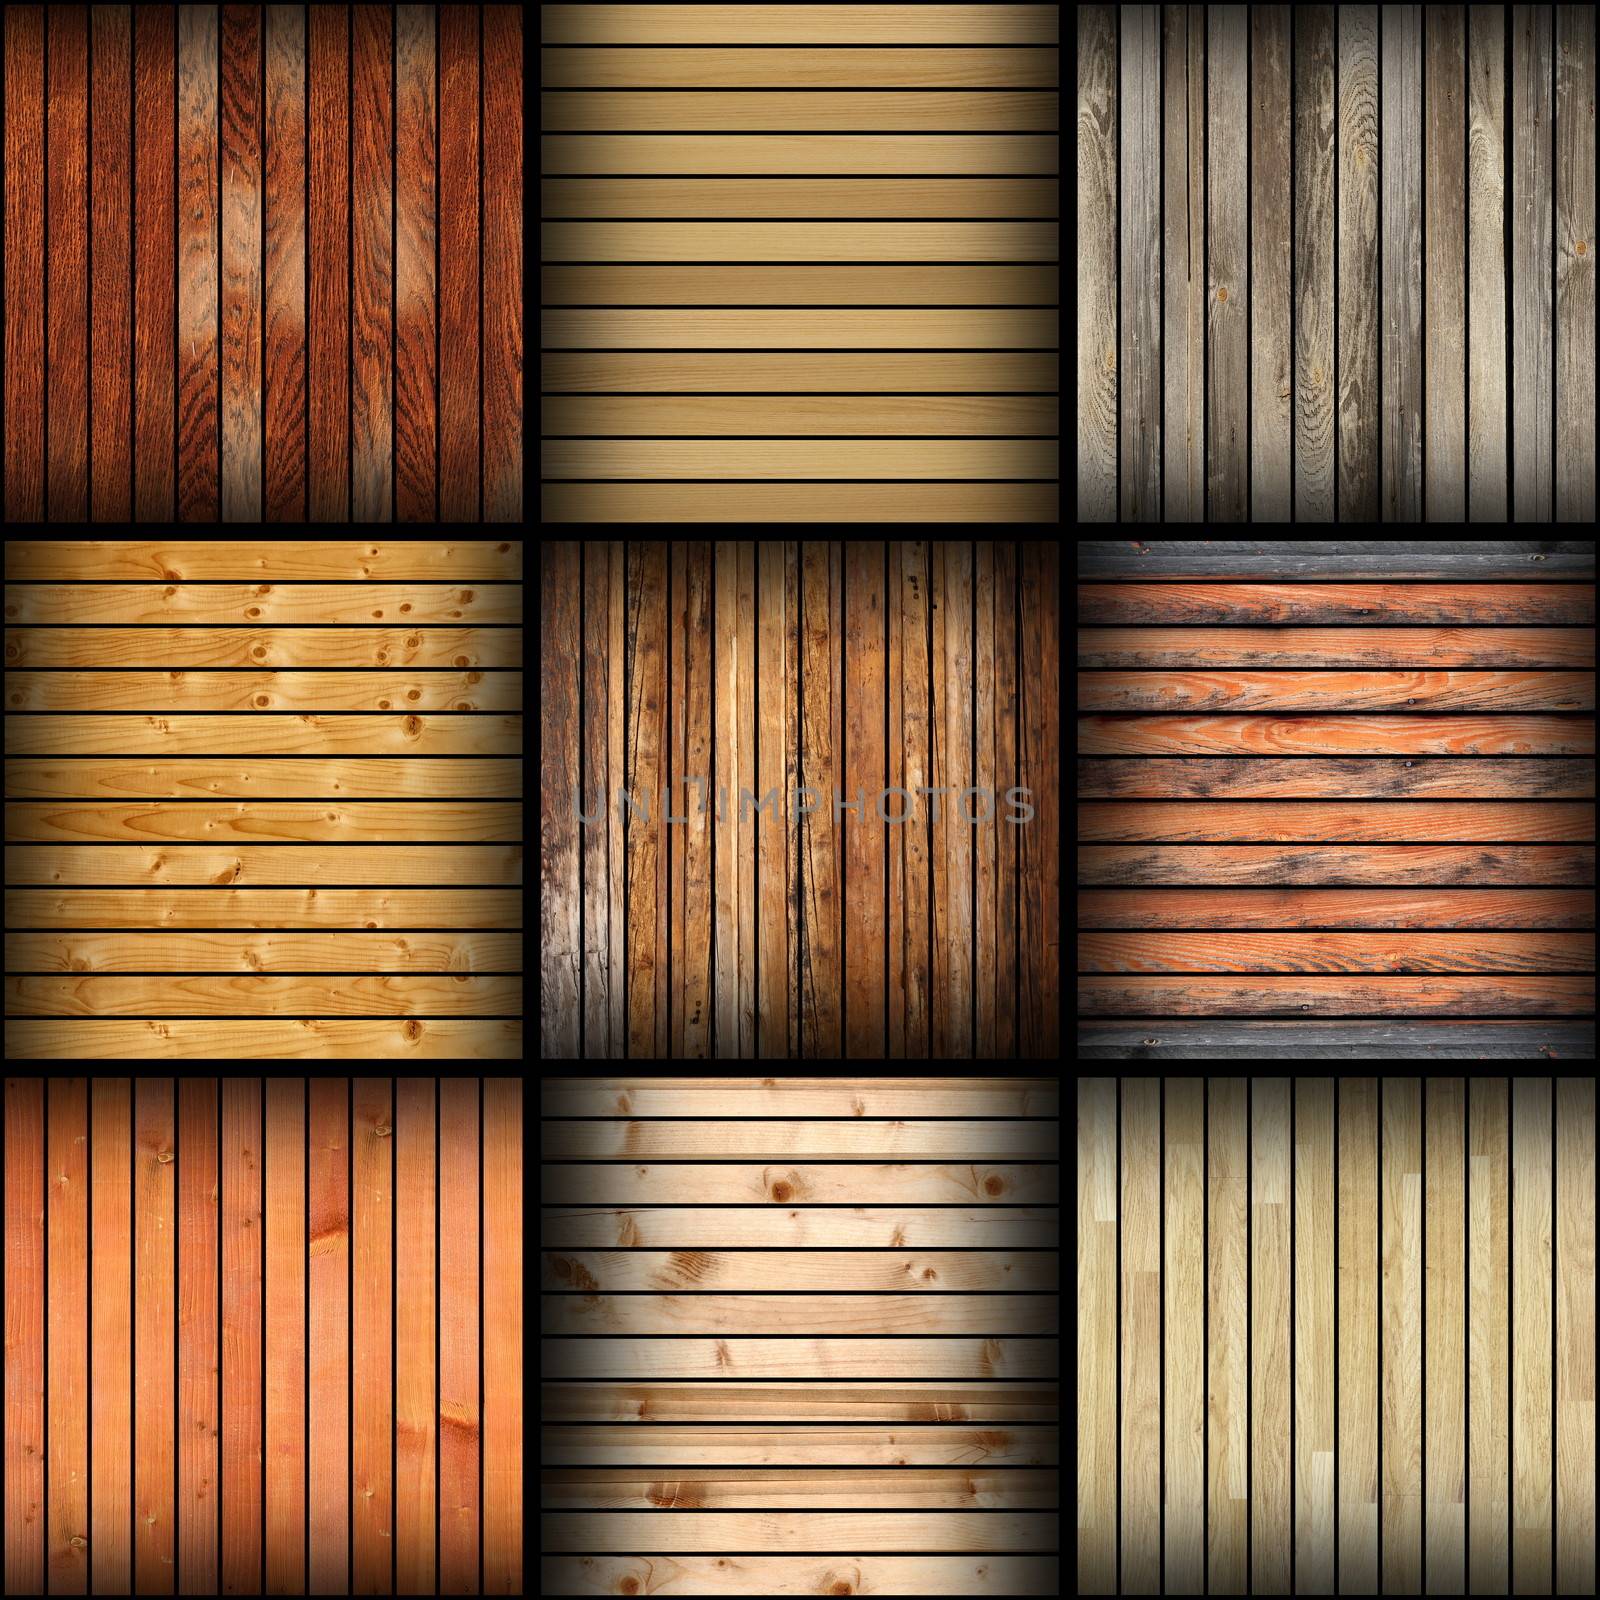 collage of different wooden tiles by taviphoto